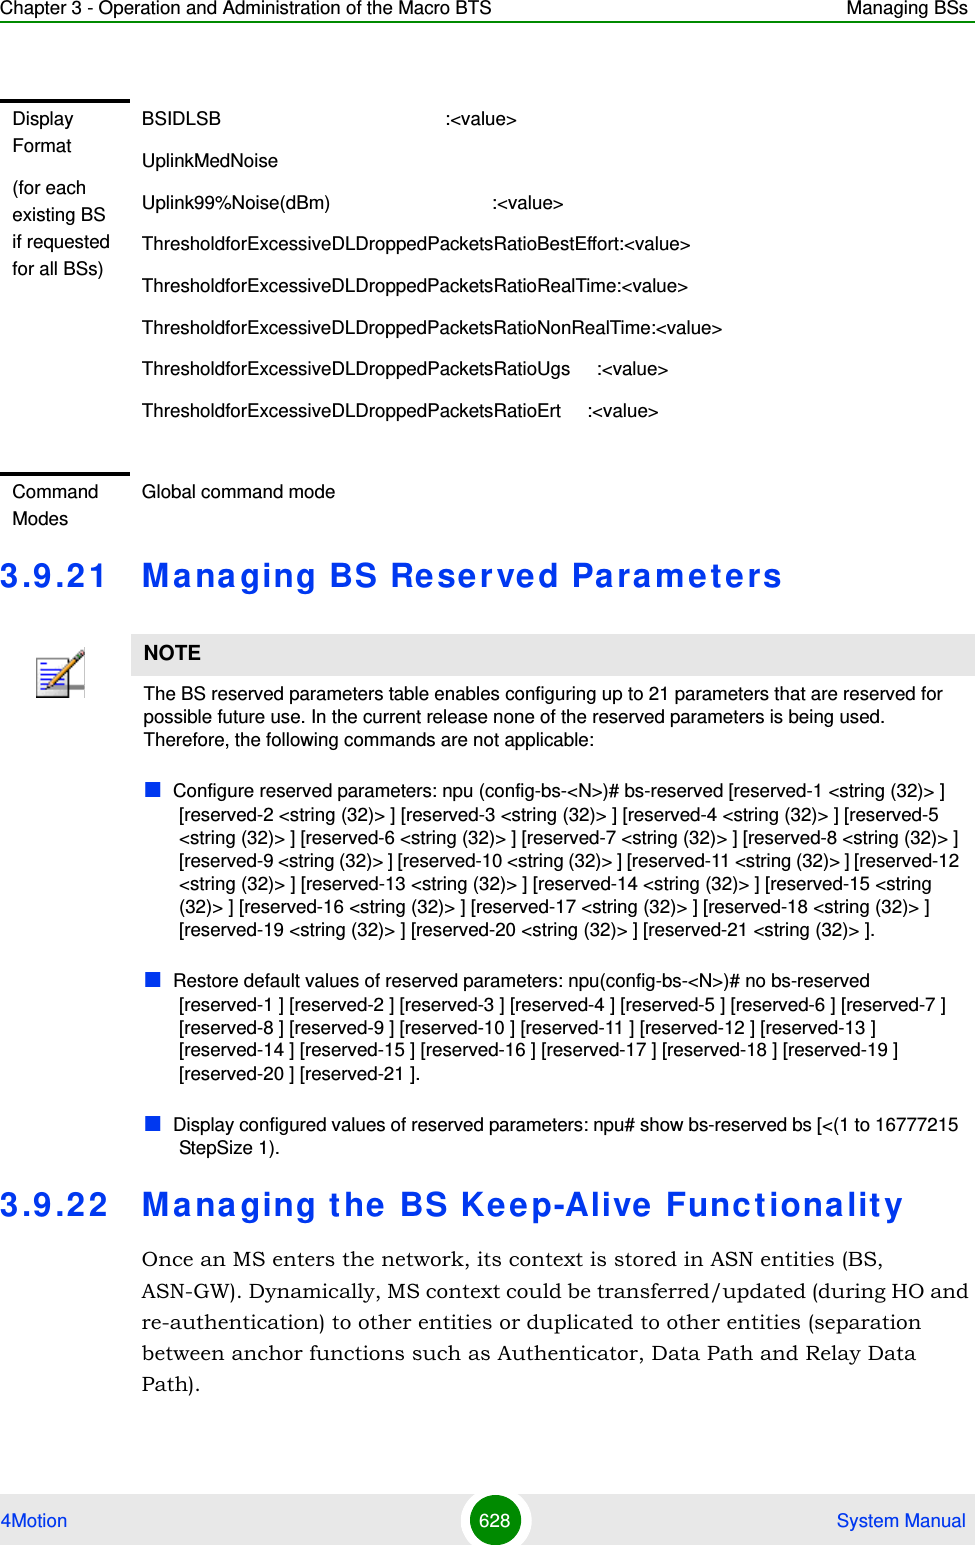 Chapter 3 - Operation and Administration of the Macro BTS Managing BSs4Motion 628  System Manual3.9 .21 Managing BS Rese r ve d Pa rameters3.9 .22 Managing the BS Ke e p-Alive Functionalit yOnce an MS enters the network, its context is stored in ASN entities (BS, ASN-GW). Dynamically, MS context could be transferred/updated (during HO and re-authentication) to other entities or duplicated to other entities (separation between anchor functions such as Authenticator, Data Path and Relay Data Path).Display Format(for each existing BS if requested for all BSs)BSIDLSB                                           :&lt;value&gt;UplinkMedNoiseUplink99%Noise(dBm)                               :&lt;value&gt;ThresholdforExcessiveDLDroppedPacketsRatioBestEffort:&lt;value&gt;ThresholdforExcessiveDLDroppedPacketsRatioRealTime:&lt;value&gt;ThresholdforExcessiveDLDroppedPacketsRatioNonRealTime:&lt;value&gt;ThresholdforExcessiveDLDroppedPacketsRatioUgs     :&lt;value&gt;ThresholdforExcessiveDLDroppedPacketsRatioErt     :&lt;value&gt;Command ModesGlobal command modeNOTEThe BS reserved parameters table enables configuring up to 21 parameters that are reserved for possible future use. In the current release none of the reserved parameters is being used. Therefore, the following commands are not applicable:Configure reserved parameters: npu (config-bs-&lt;N&gt;)# bs-reserved [reserved-1 &lt;string (32)&gt; ] [reserved-2 &lt;string (32)&gt; ] [reserved-3 &lt;string (32)&gt; ] [reserved-4 &lt;string (32)&gt; ] [reserved-5 &lt;string (32)&gt; ] [reserved-6 &lt;string (32)&gt; ] [reserved-7 &lt;string (32)&gt; ] [reserved-8 &lt;string (32)&gt; ] [reserved-9 &lt;string (32)&gt; ] [reserved-10 &lt;string (32)&gt; ] [reserved-11 &lt;string (32)&gt; ] [reserved-12 &lt;string (32)&gt; ] [reserved-13 &lt;string (32)&gt; ] [reserved-14 &lt;string (32)&gt; ] [reserved-15 &lt;string (32)&gt; ] [reserved-16 &lt;string (32)&gt; ] [reserved-17 &lt;string (32)&gt; ] [reserved-18 &lt;string (32)&gt; ] [reserved-19 &lt;string (32)&gt; ] [reserved-20 &lt;string (32)&gt; ] [reserved-21 &lt;string (32)&gt; ].Restore default values of reserved parameters: npu(config-bs-&lt;N&gt;)# no bs-reserved [reserved-1 ] [reserved-2 ] [reserved-3 ] [reserved-4 ] [reserved-5 ] [reserved-6 ] [reserved-7 ] [reserved-8 ] [reserved-9 ] [reserved-10 ] [reserved-11 ] [reserved-12 ] [reserved-13 ] [reserved-14 ] [reserved-15 ] [reserved-16 ] [reserved-17 ] [reserved-18 ] [reserved-19 ] [reserved-20 ] [reserved-21 ].Display configured values of reserved parameters: npu# show bs-reserved bs [&lt;(1 to 16777215 StepSize 1).